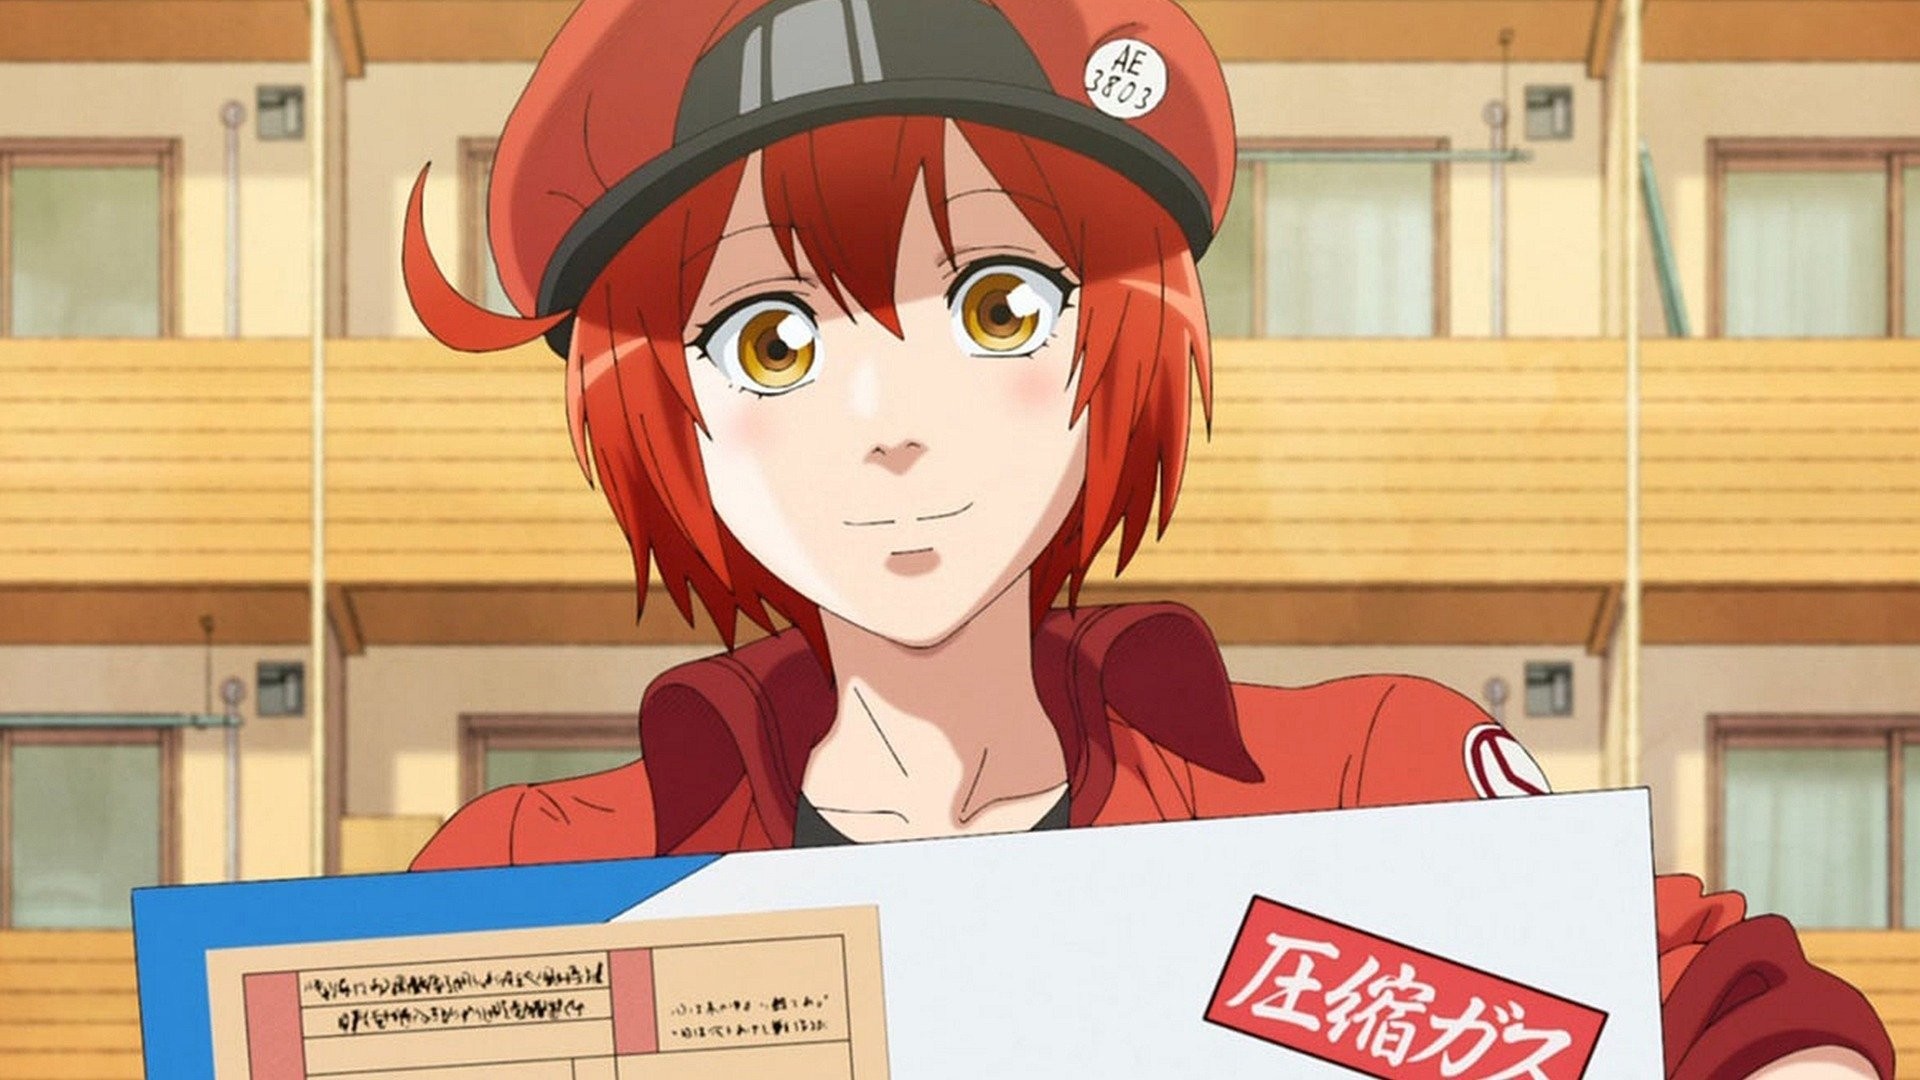 Cells at Work! TV Review